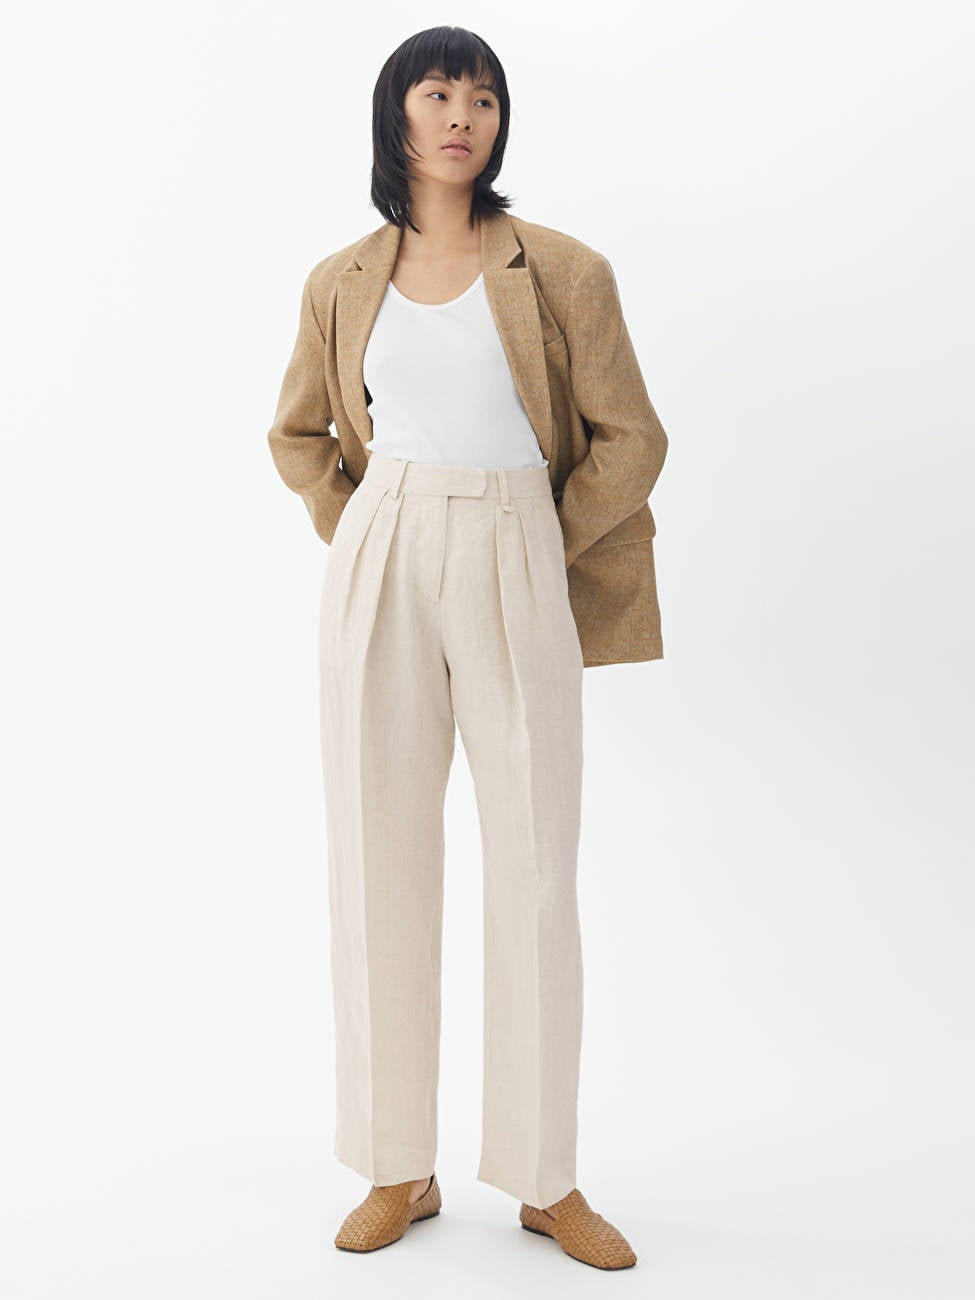 Urban Revivo high waisted linen pants with belt in beige | ASOS